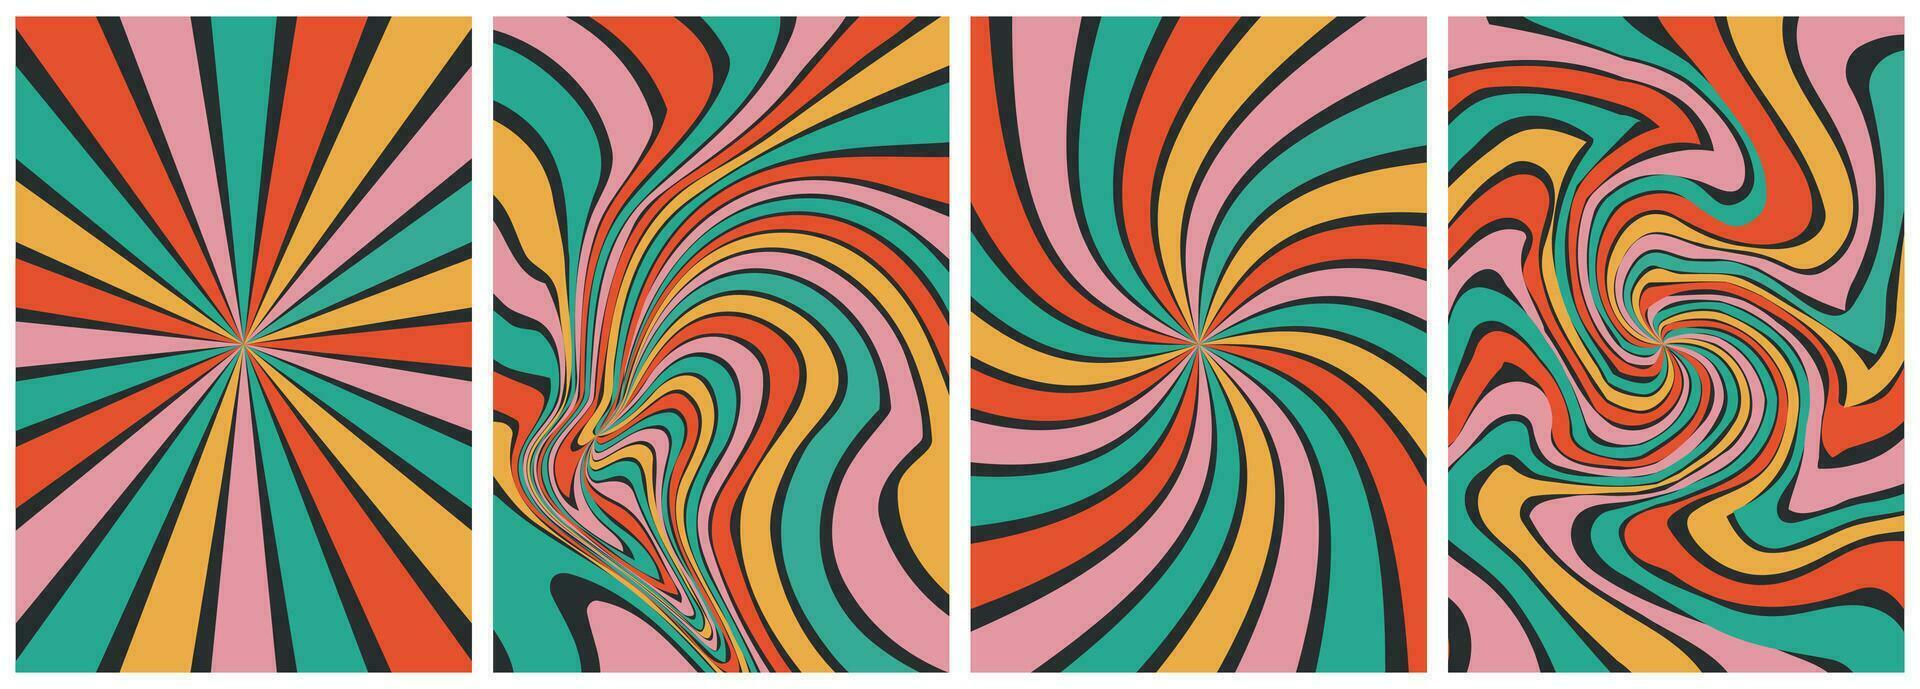 Y2k aesthetic.Set of colorful abstract background.Vector cards in retro psychedelic style